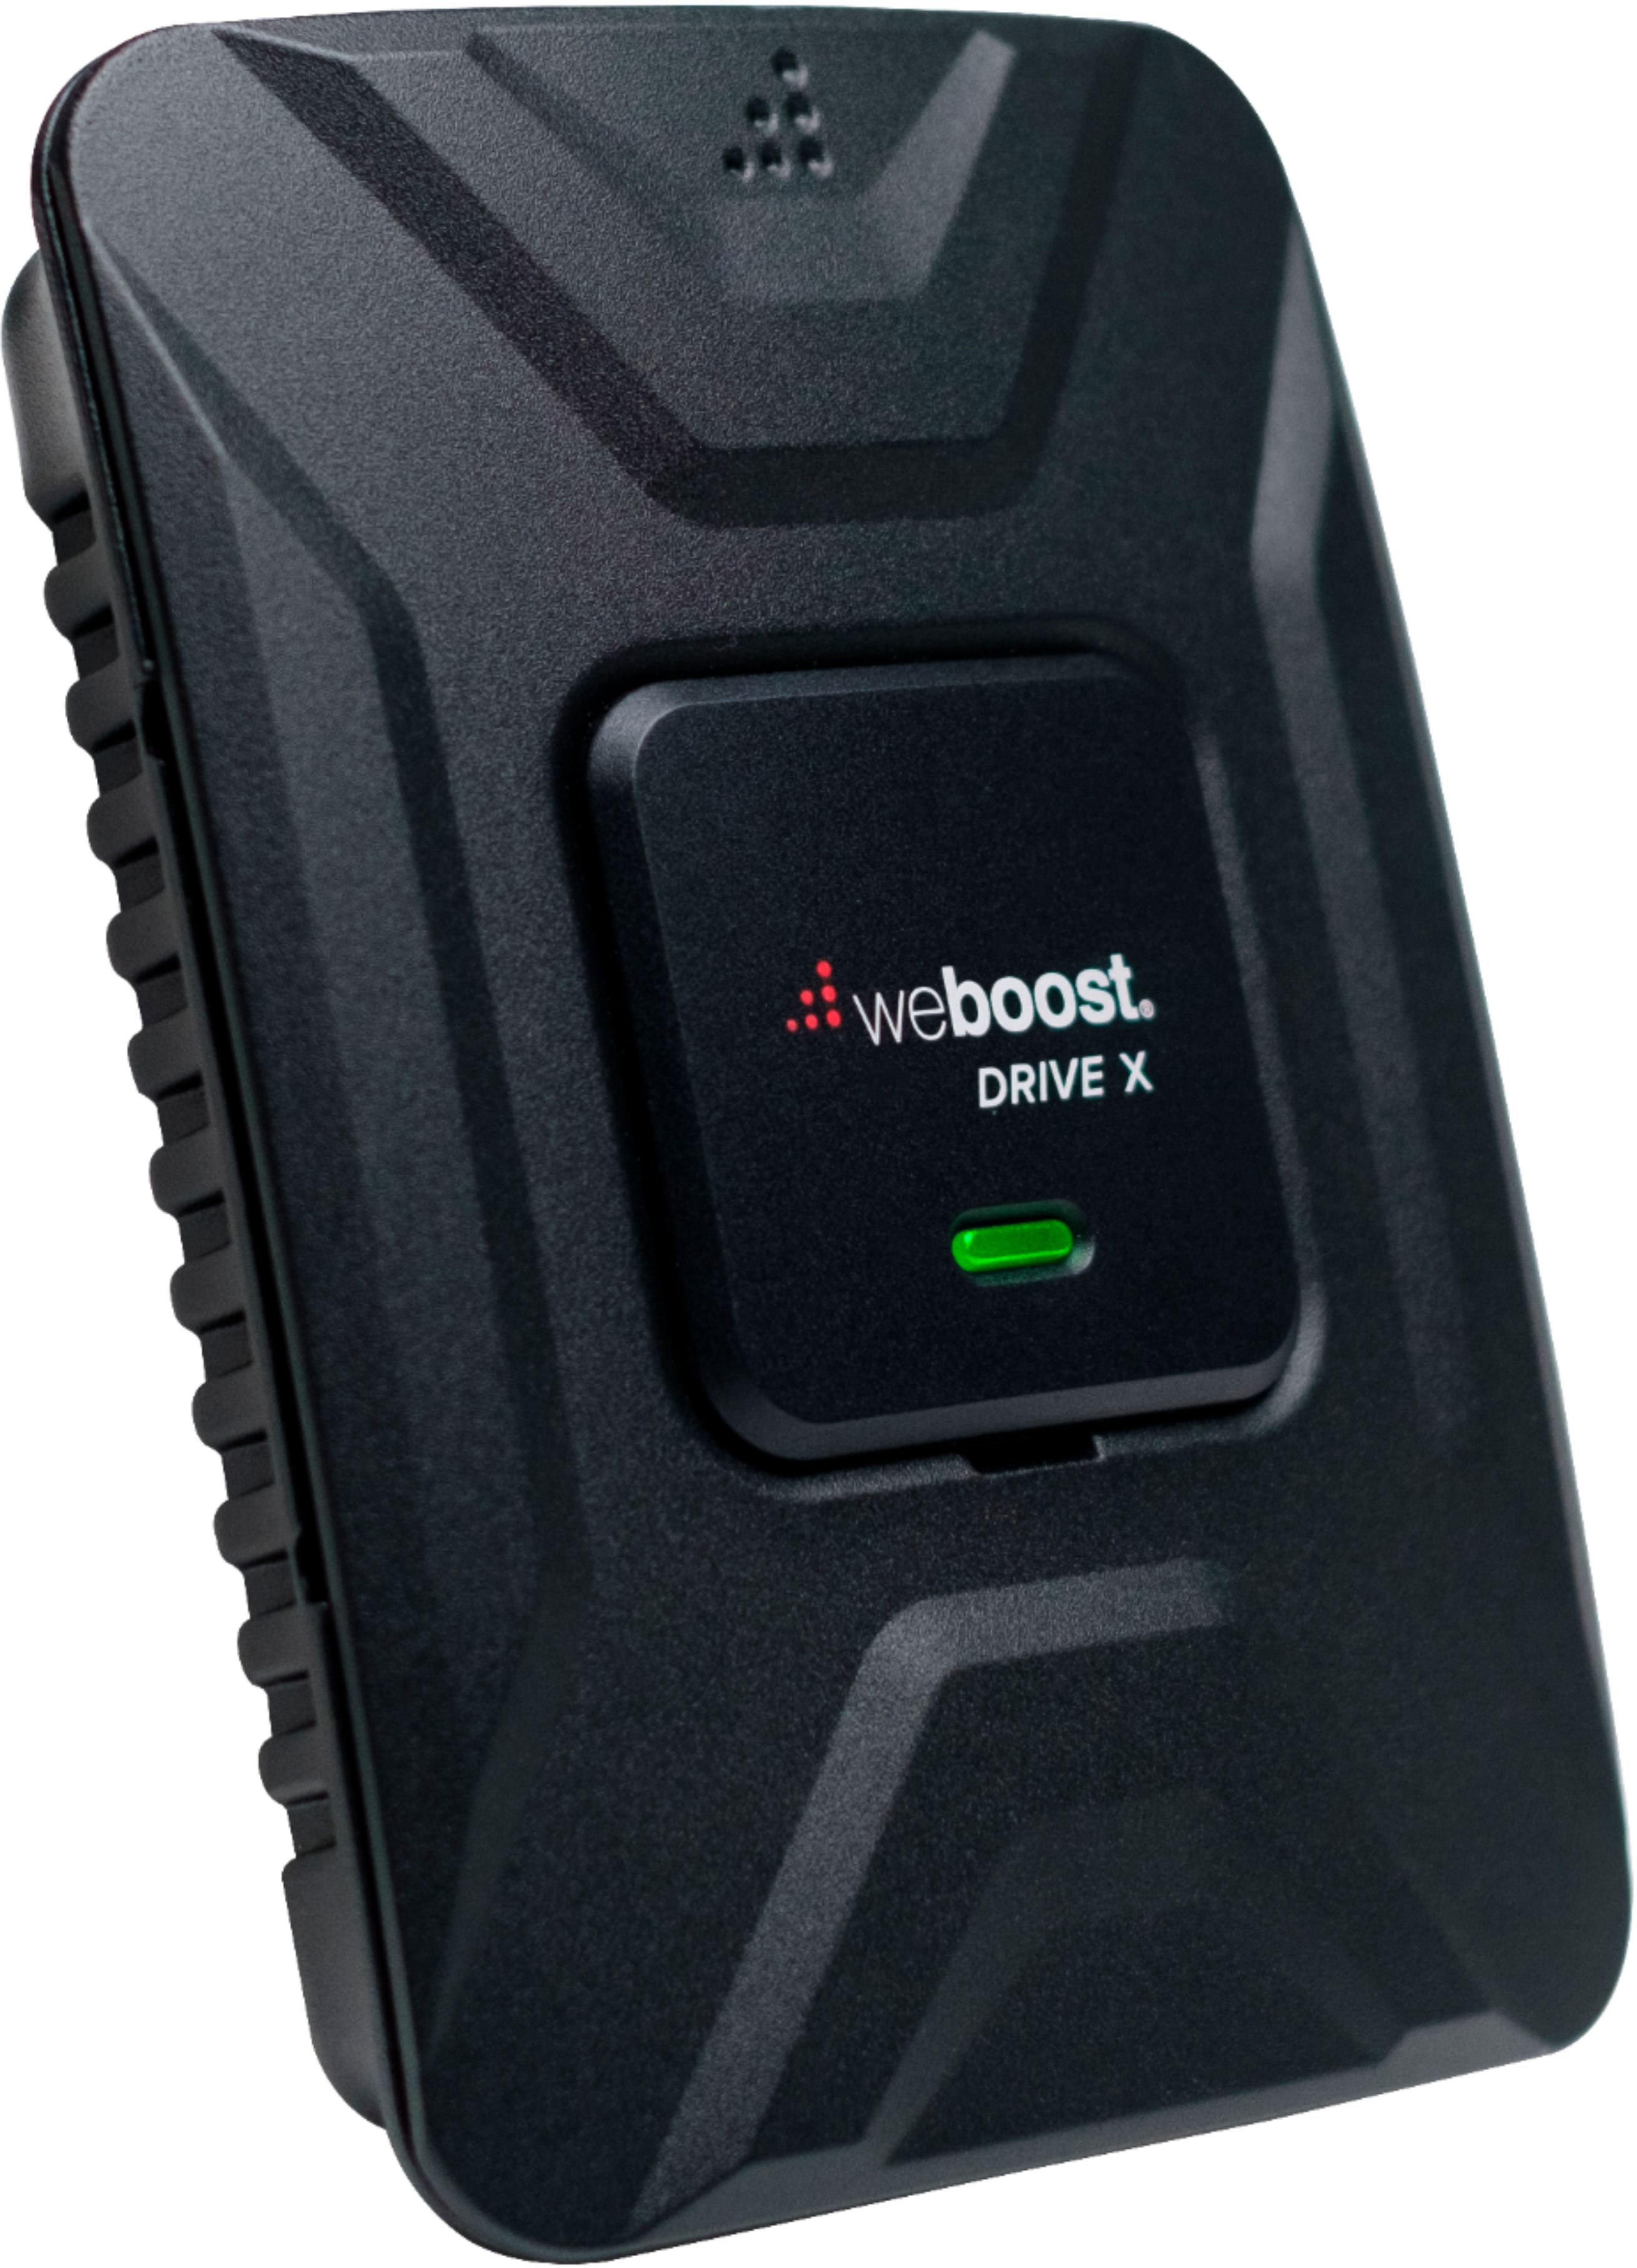 weBoost Drive X Vehicle Cell Phone Signal Booster for Car, Truck, Van, or  SUV, Boosts 5G & 4G LTE for All U.S. Carriers 475021 - Best Buy